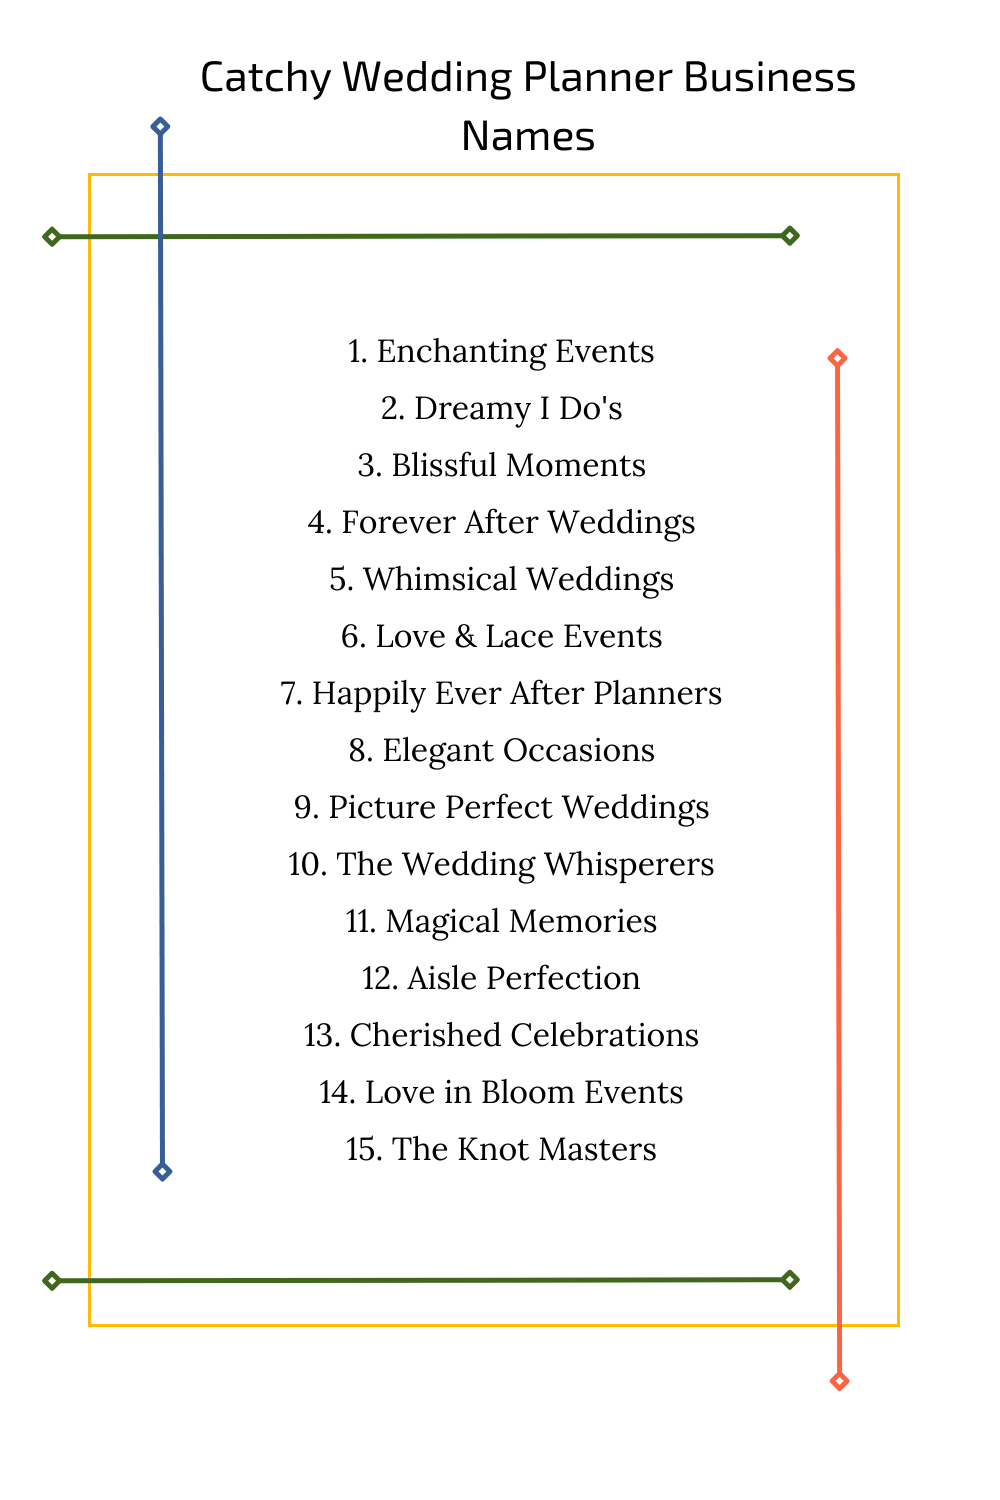 Catchy Wedding Planner Business Names